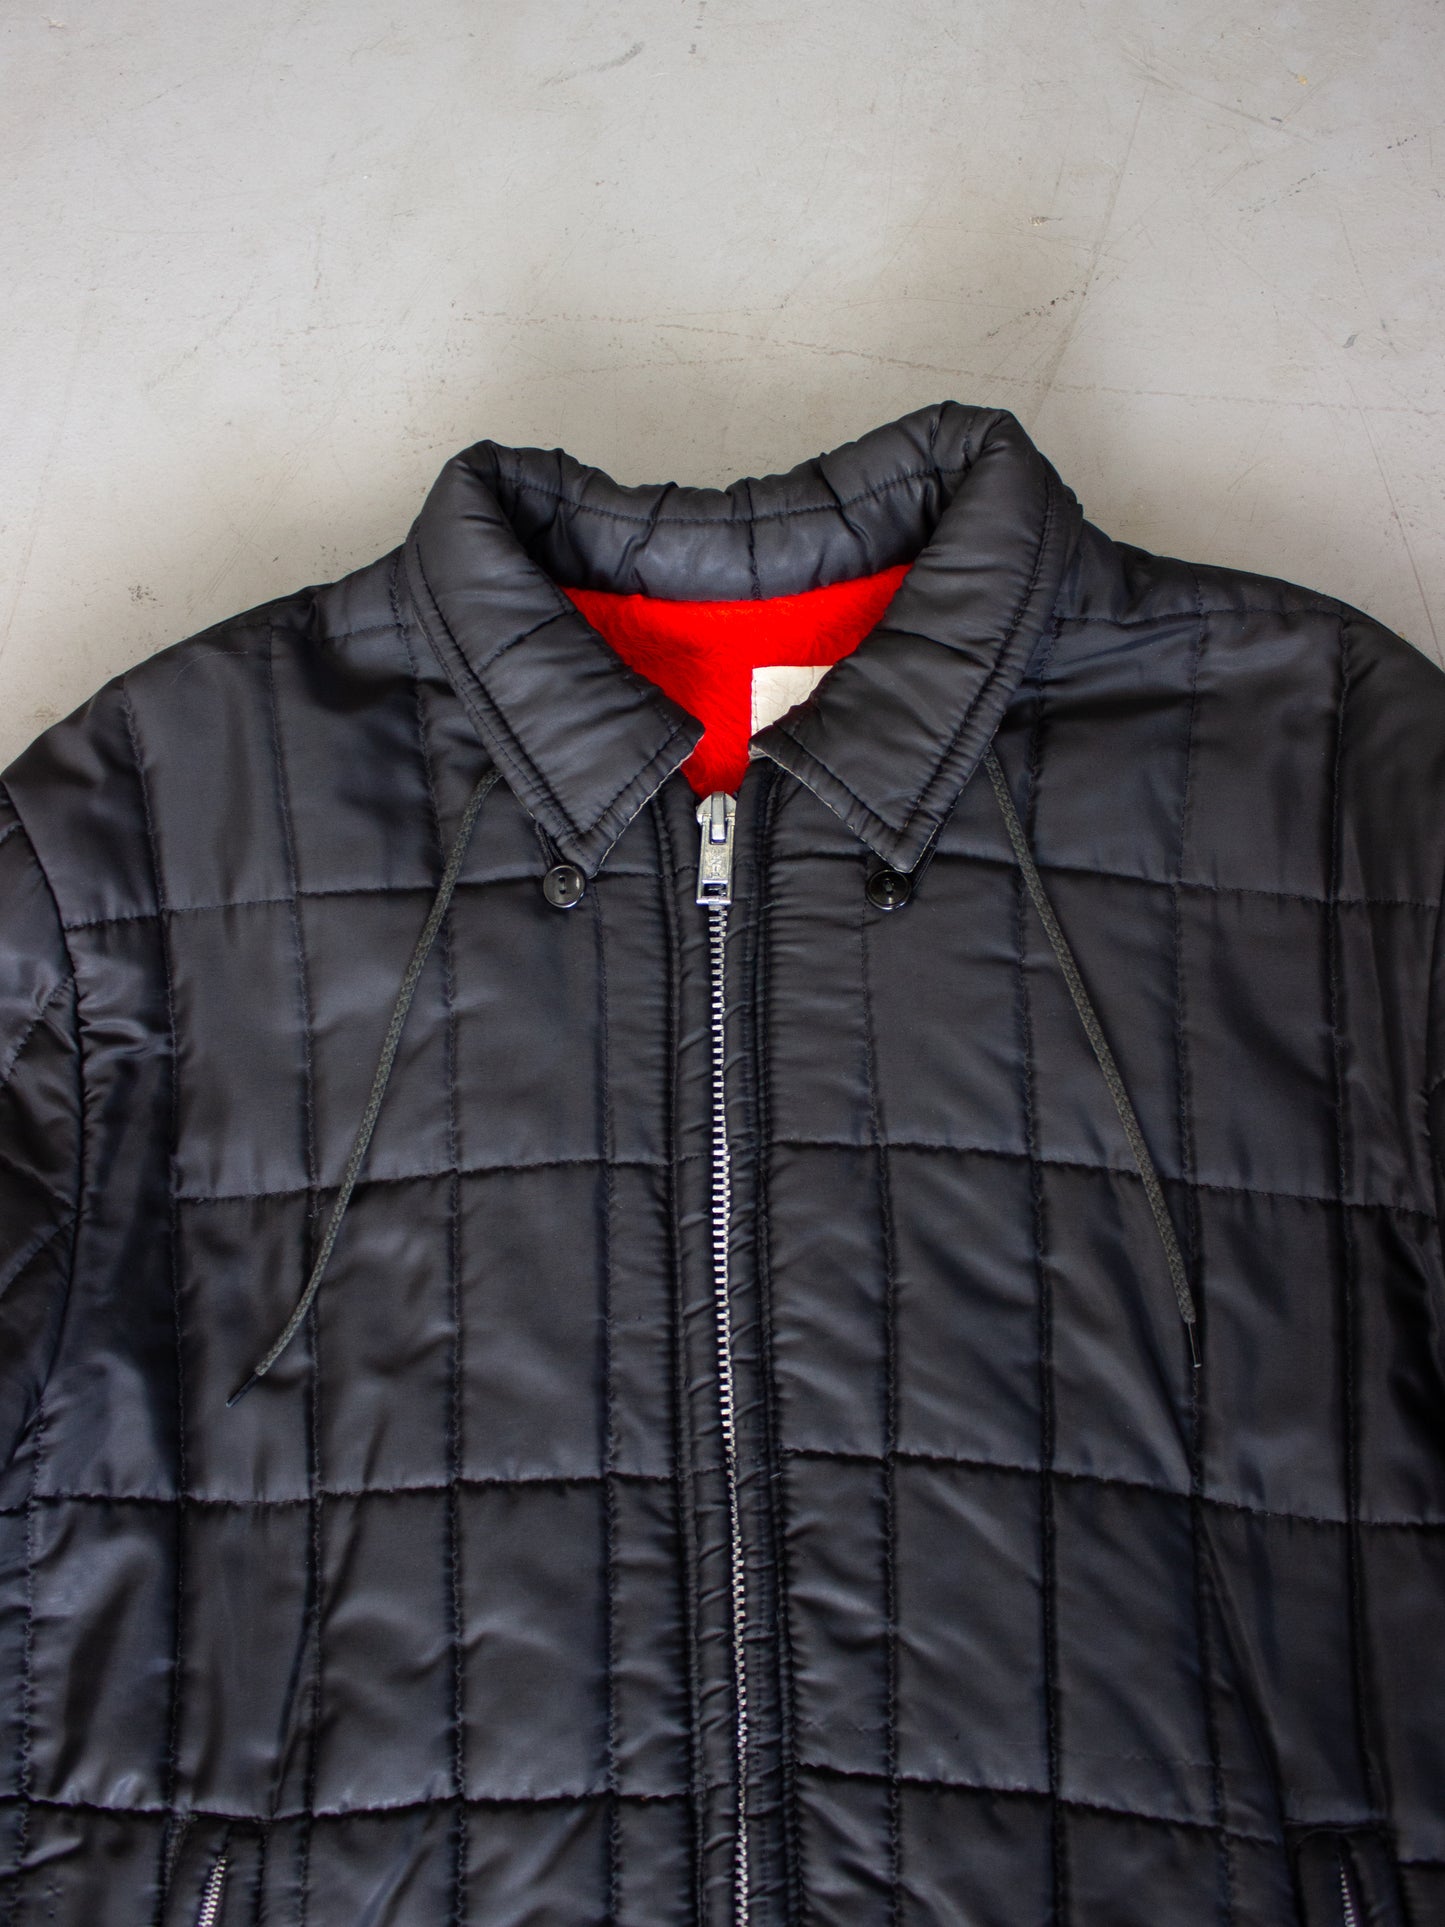 Vintage Black Quilted Zip Up Jacket with Red Fleece Lining Made in Canada (Medium-Large)